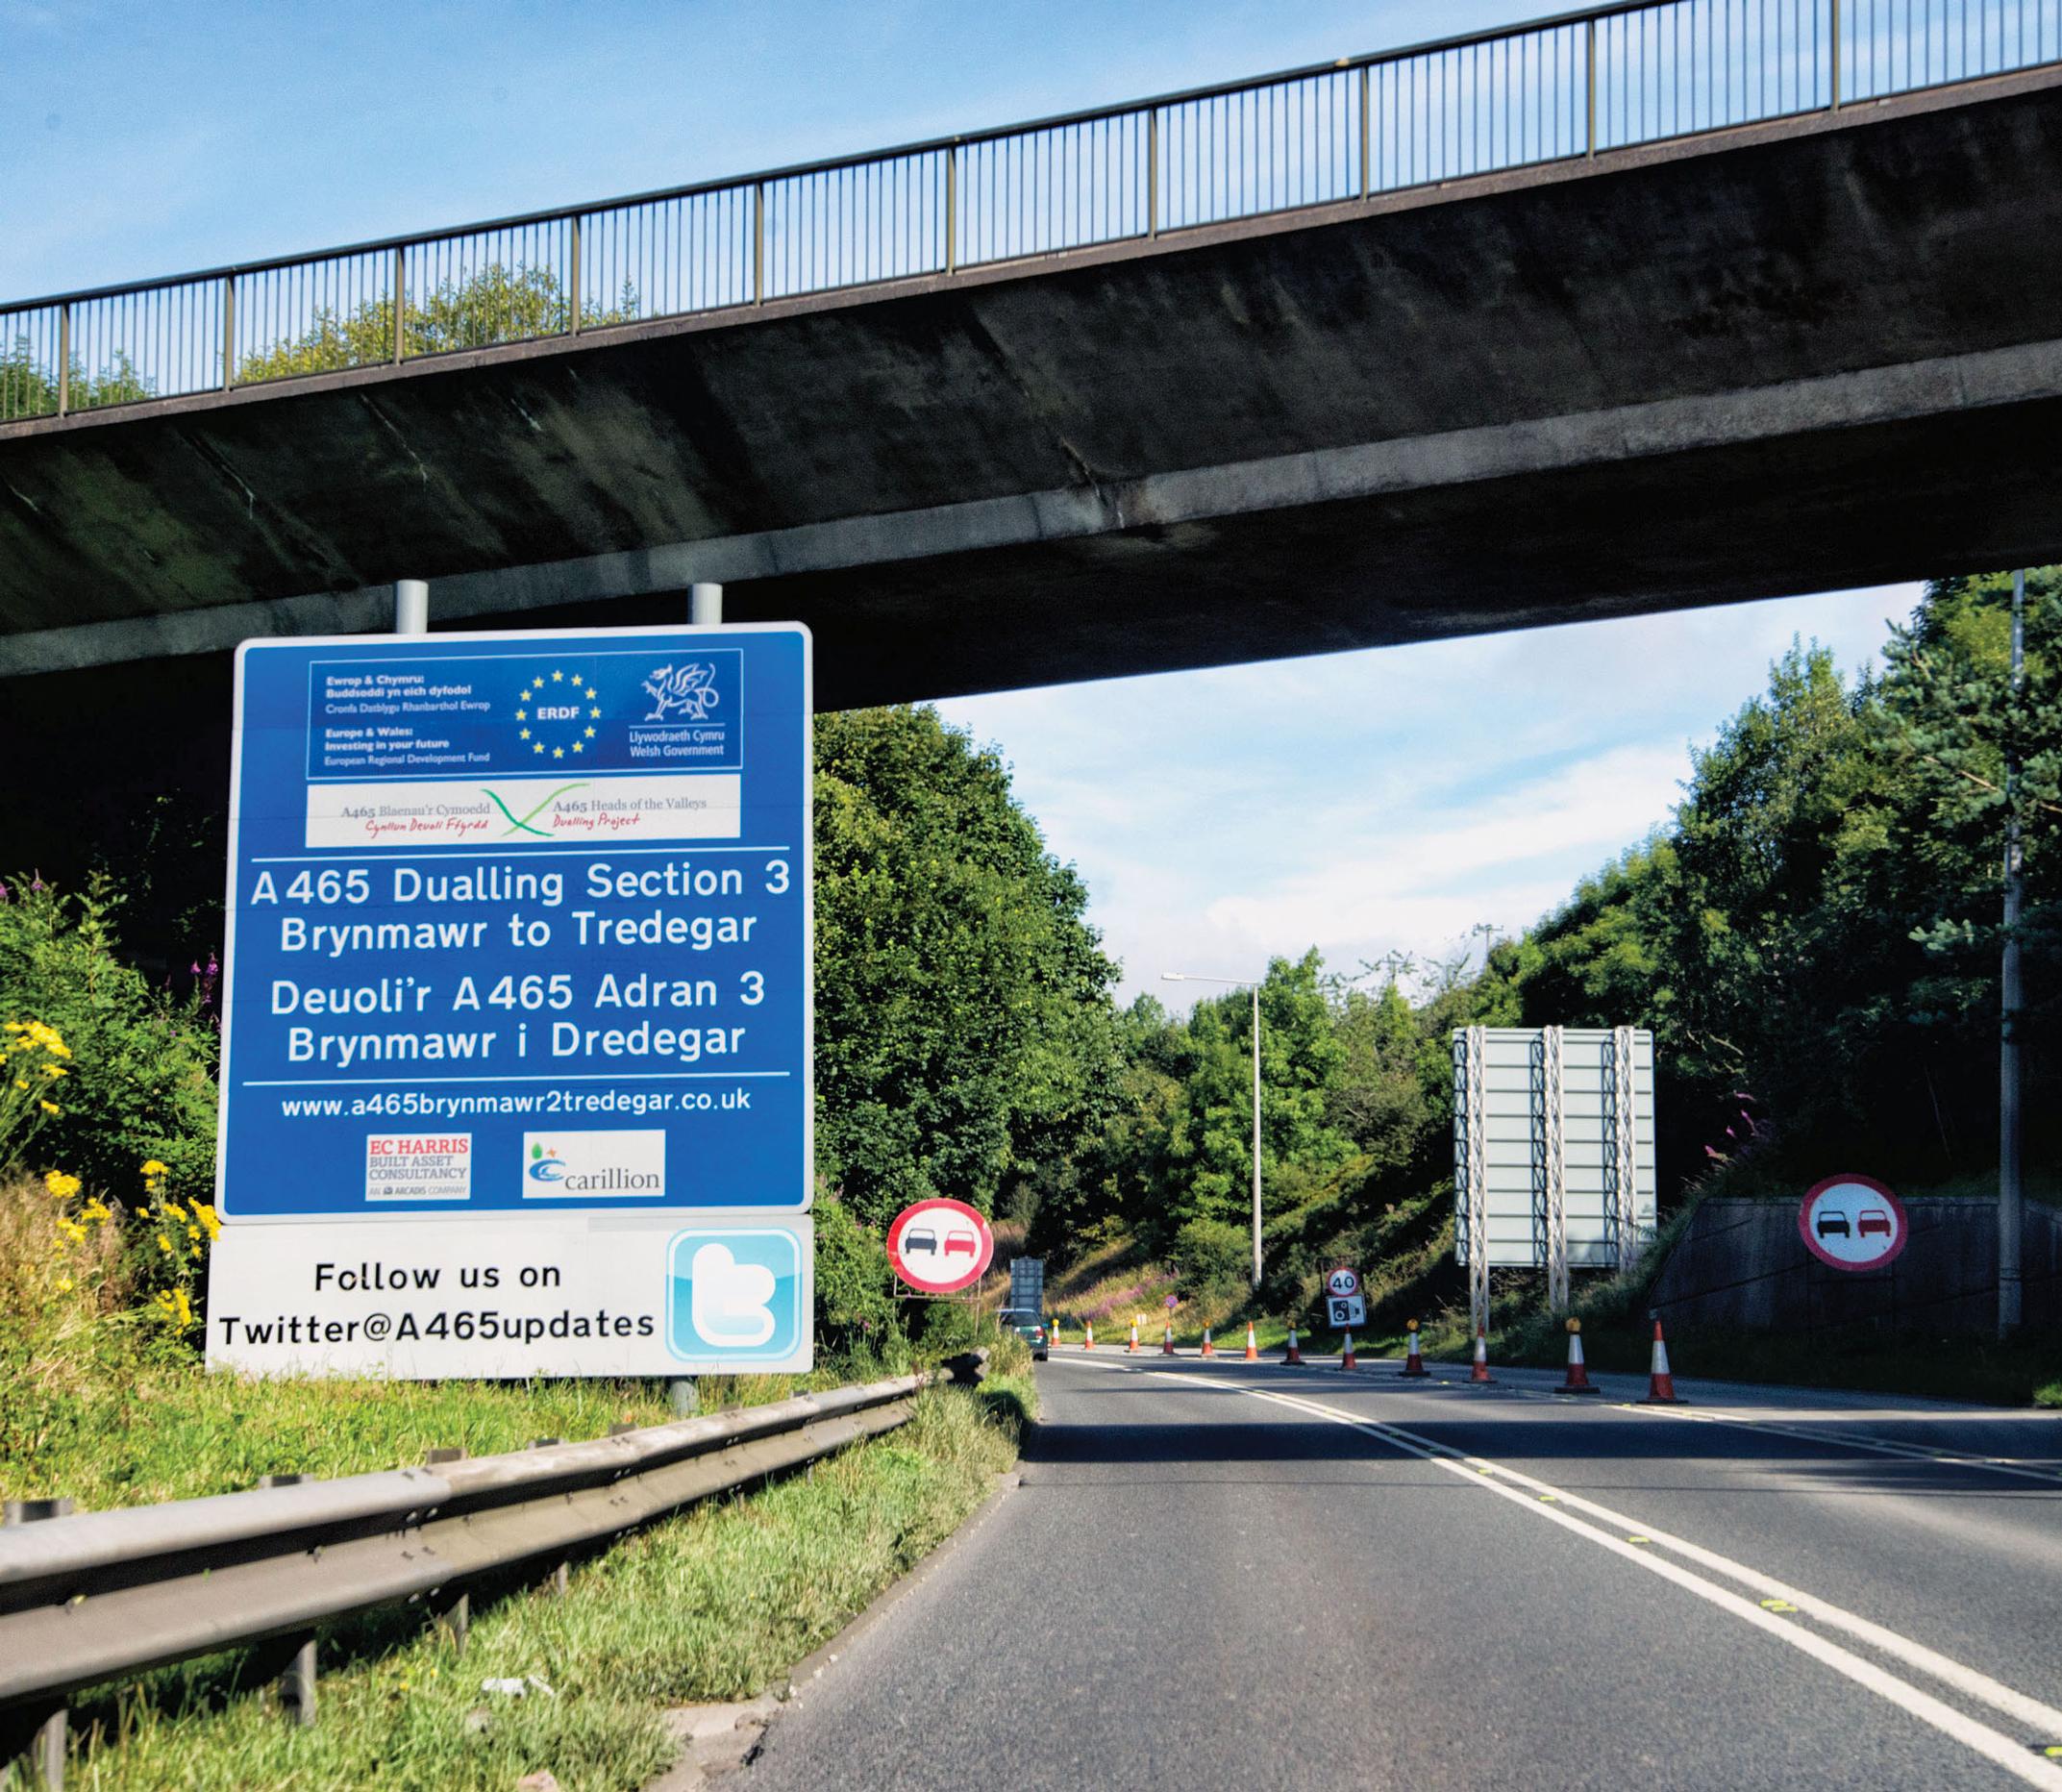 Dualling of the A465 received £82m from the European Regional Development Fund towards its £158m total cost.